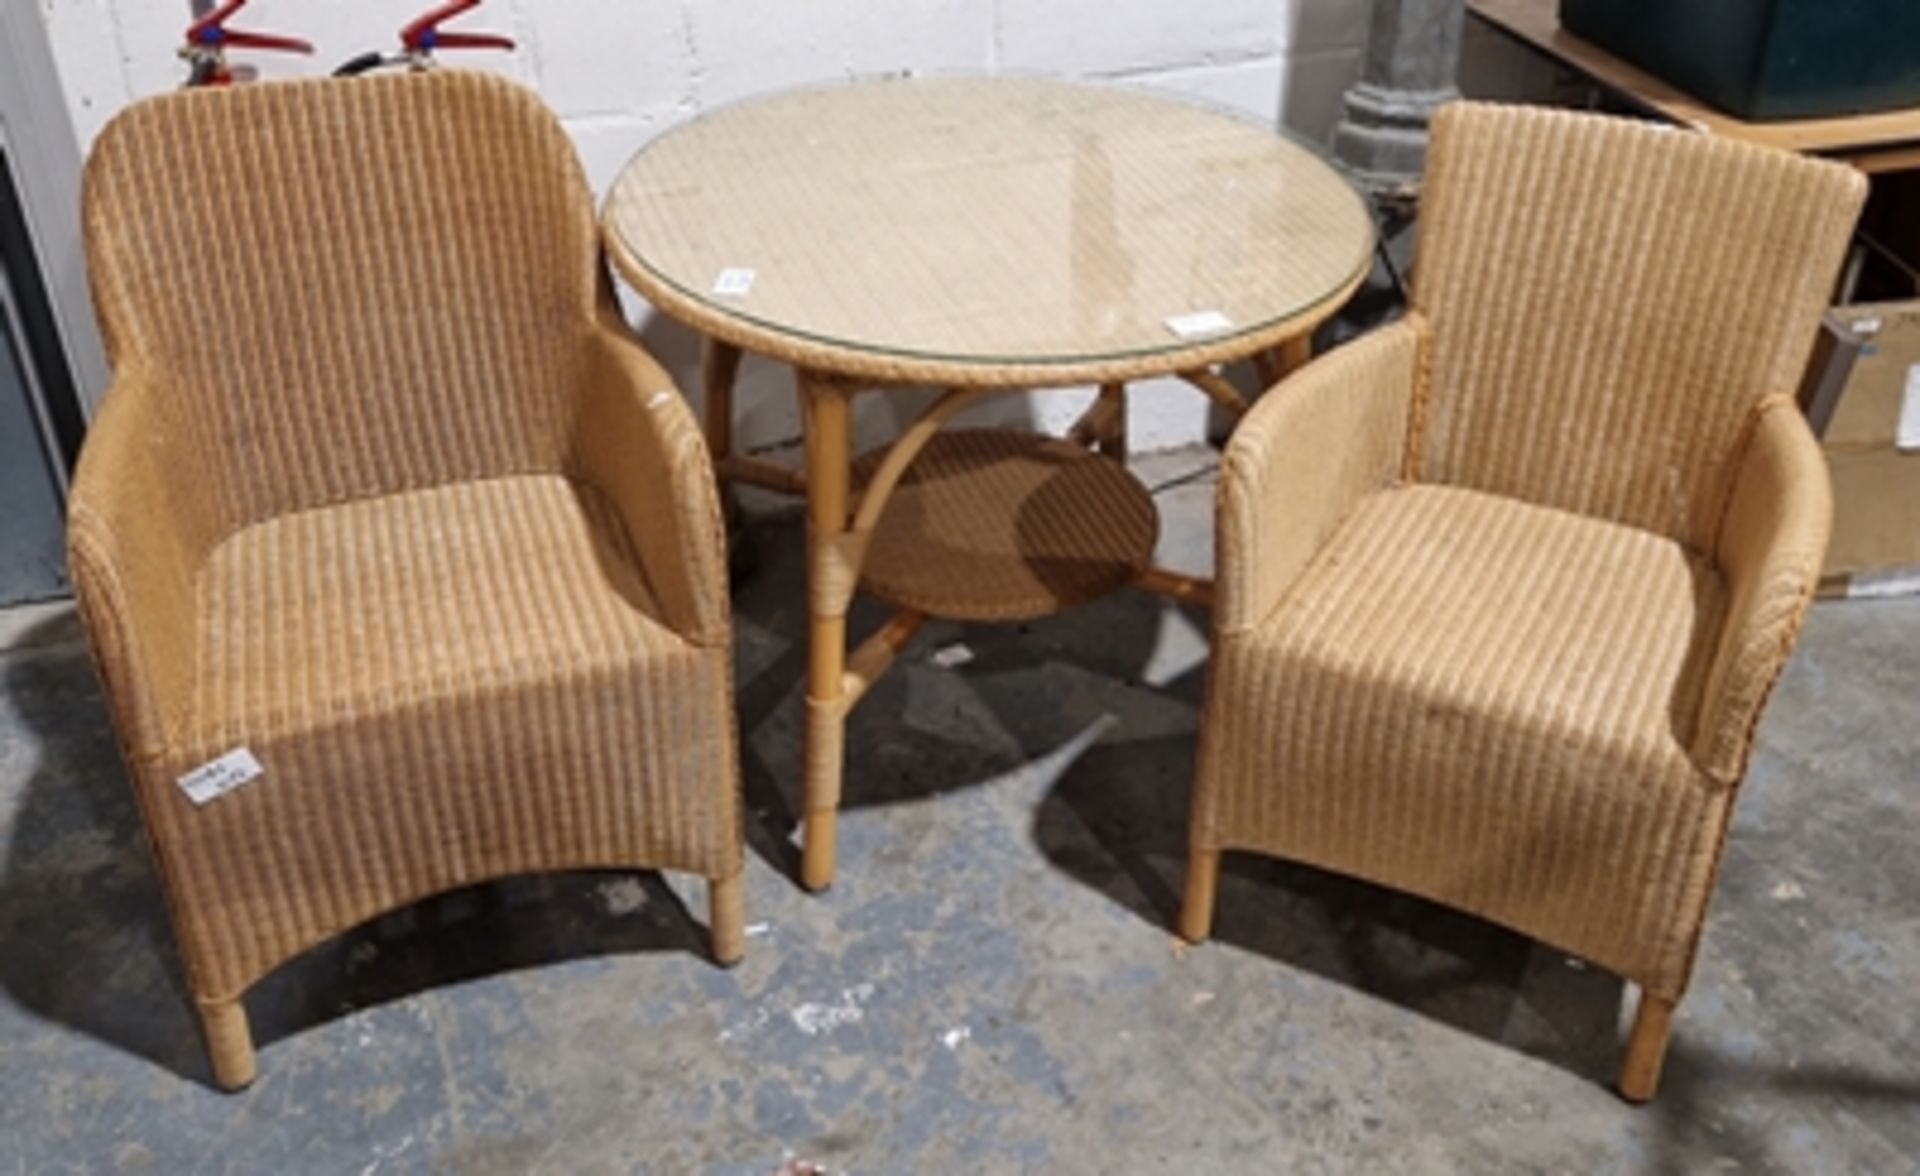 Lloyd Loom "Eastwood" Wicker/cane garden table, circular with fitted glass top and two matching